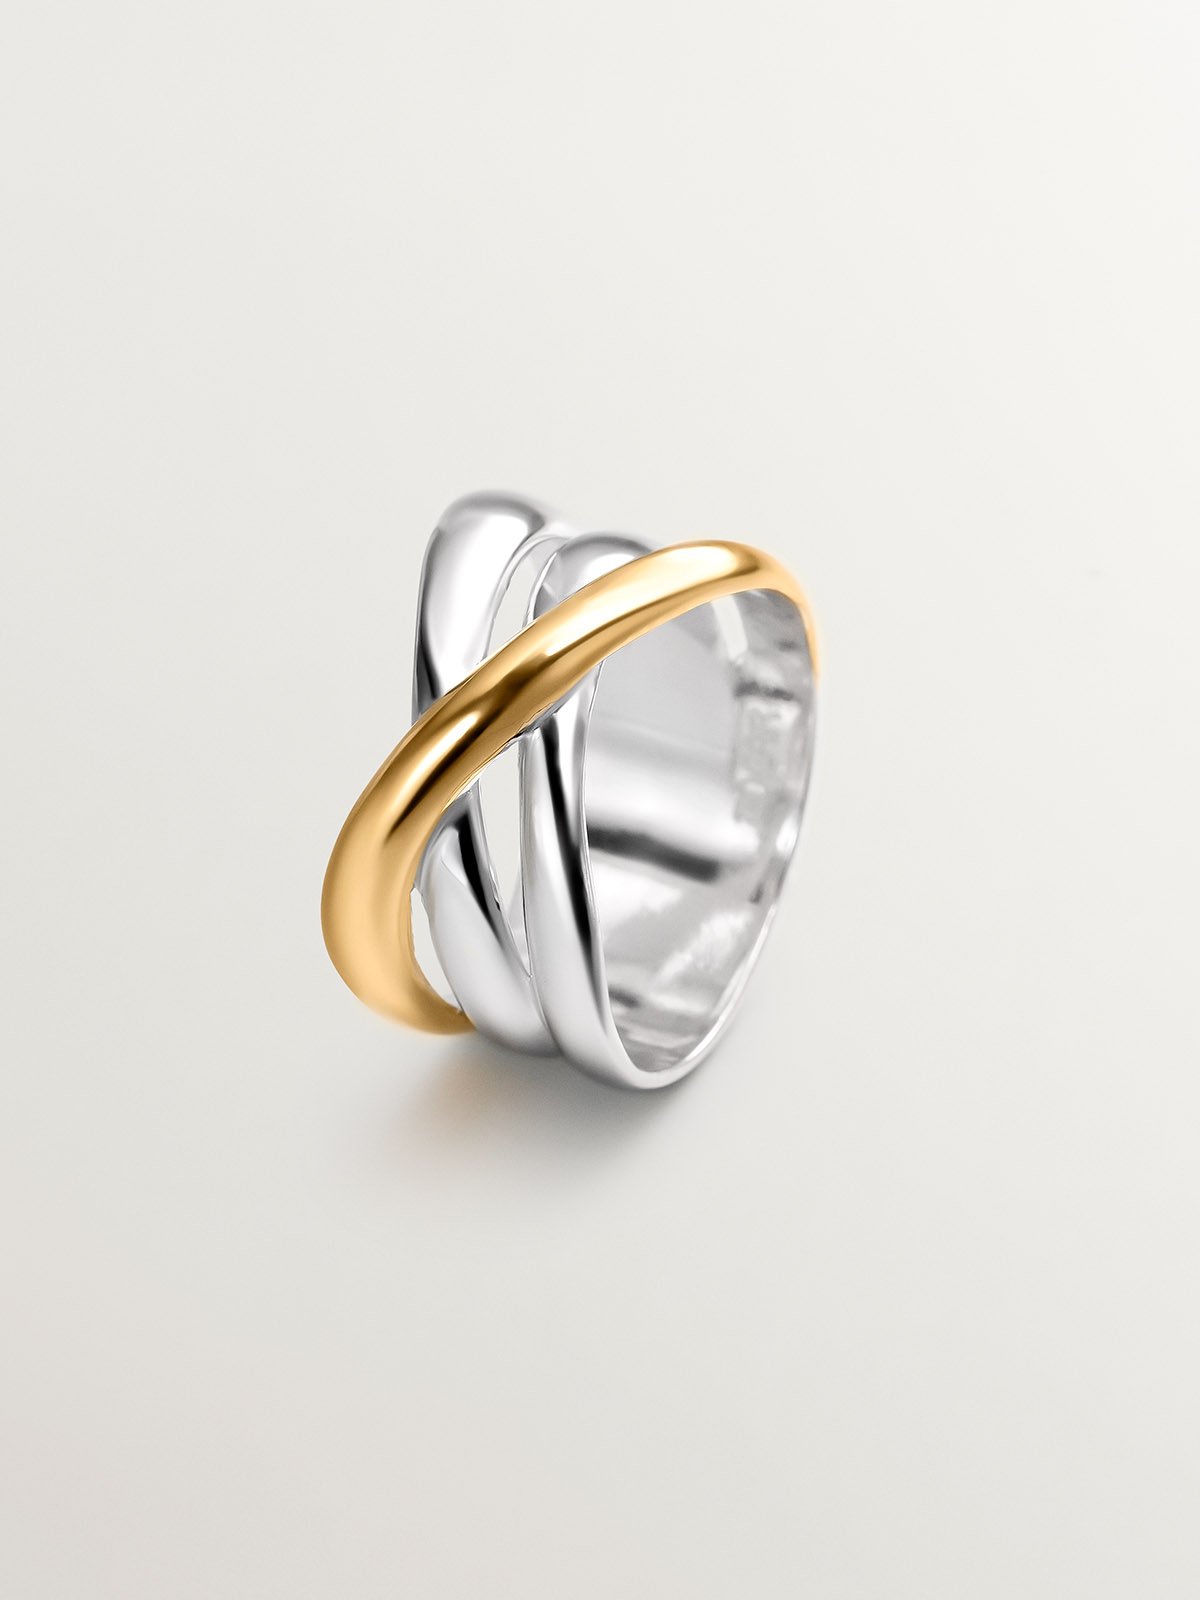 Wide triple bicolored ring made of 925 silver and 925 silver dipped in 18K yellow gold.